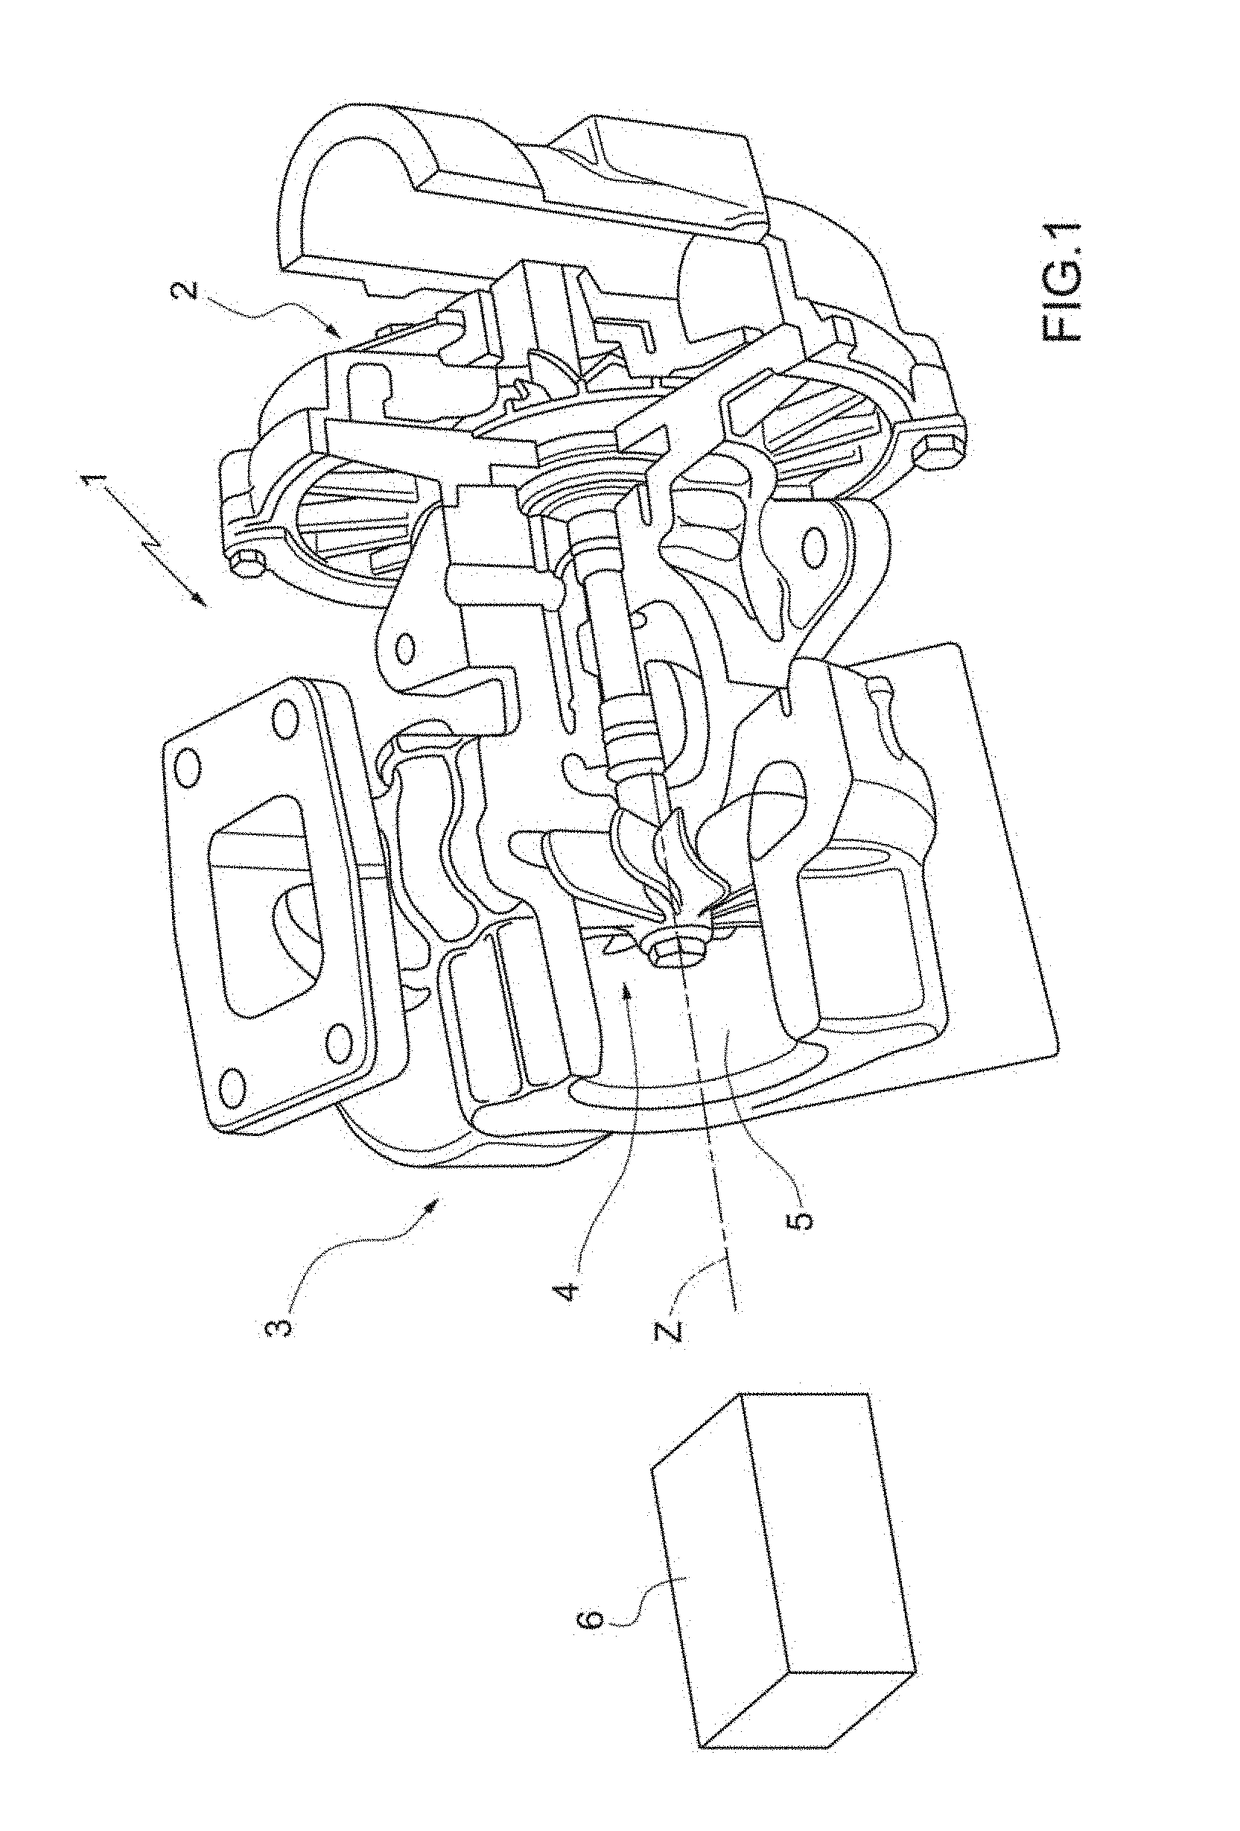 Device for the acquisition and conditioning of an acoustic signal generated by a source of an internal combustion engine